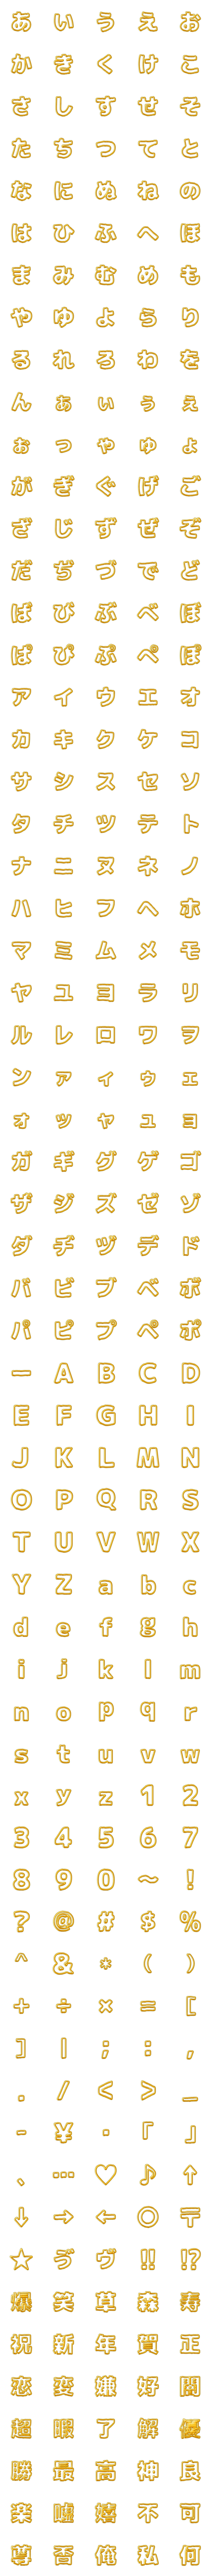 [LINE絵文字]はちみつ風デコ文字 中抜け丸ゴシックの画像一覧